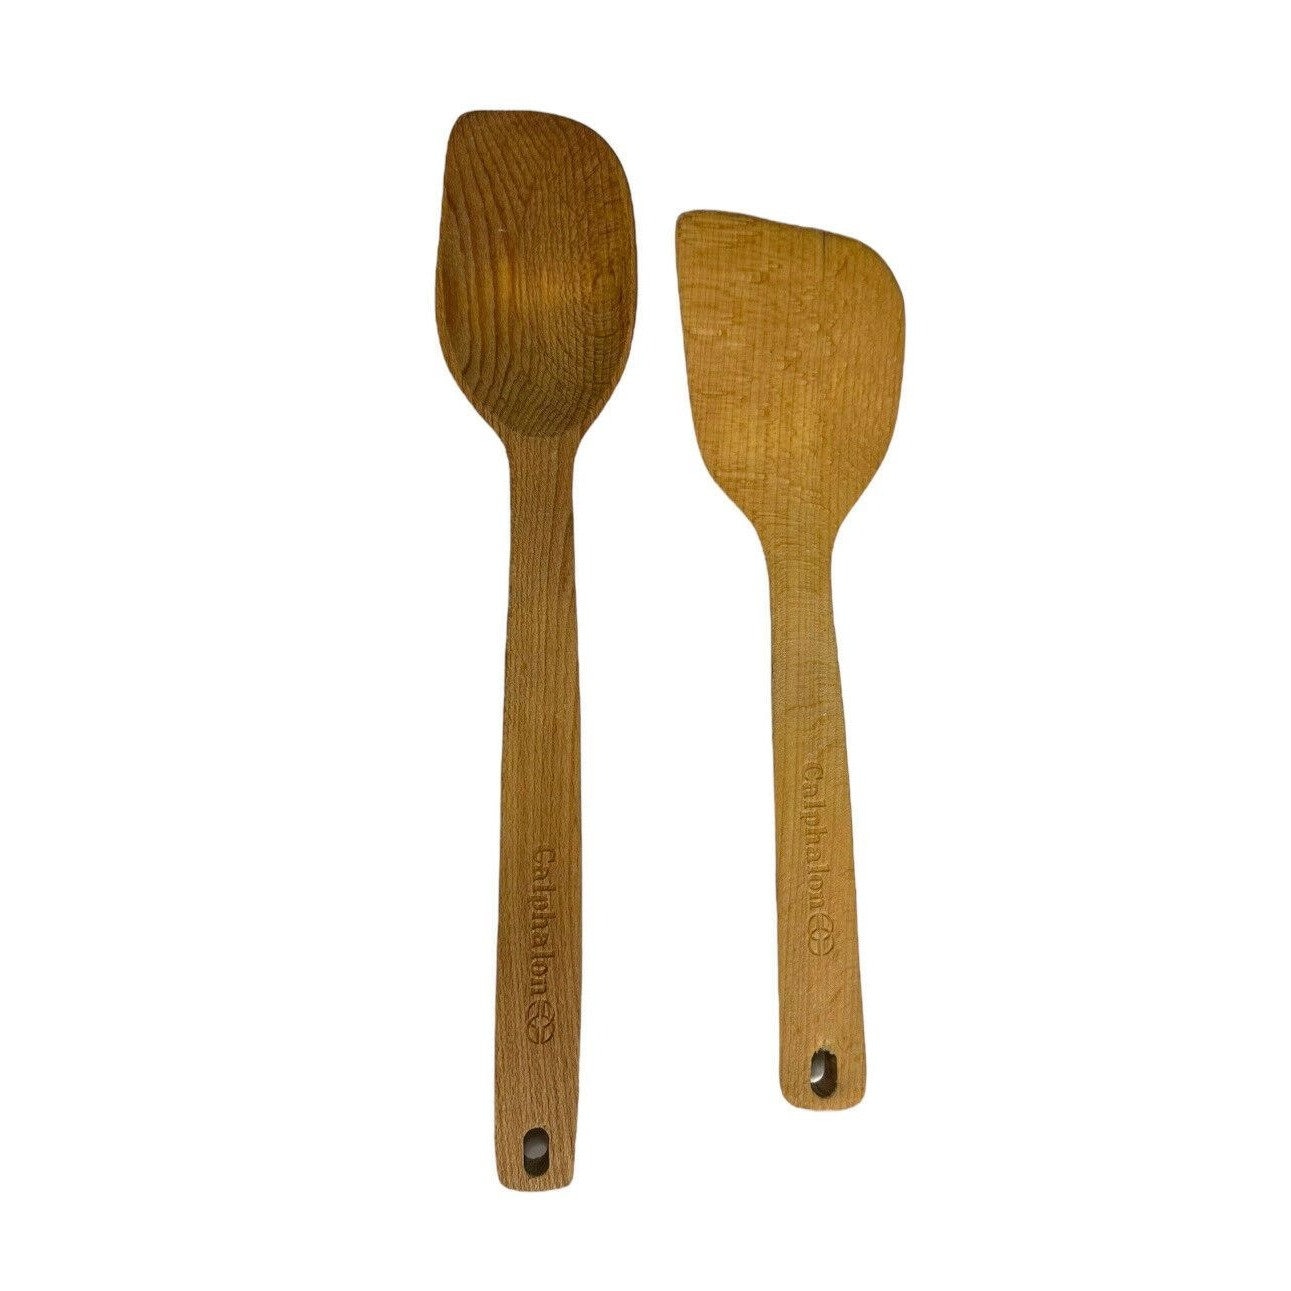 OXO Good Grips 3 Piece Wooden Spoon Set & Reviews